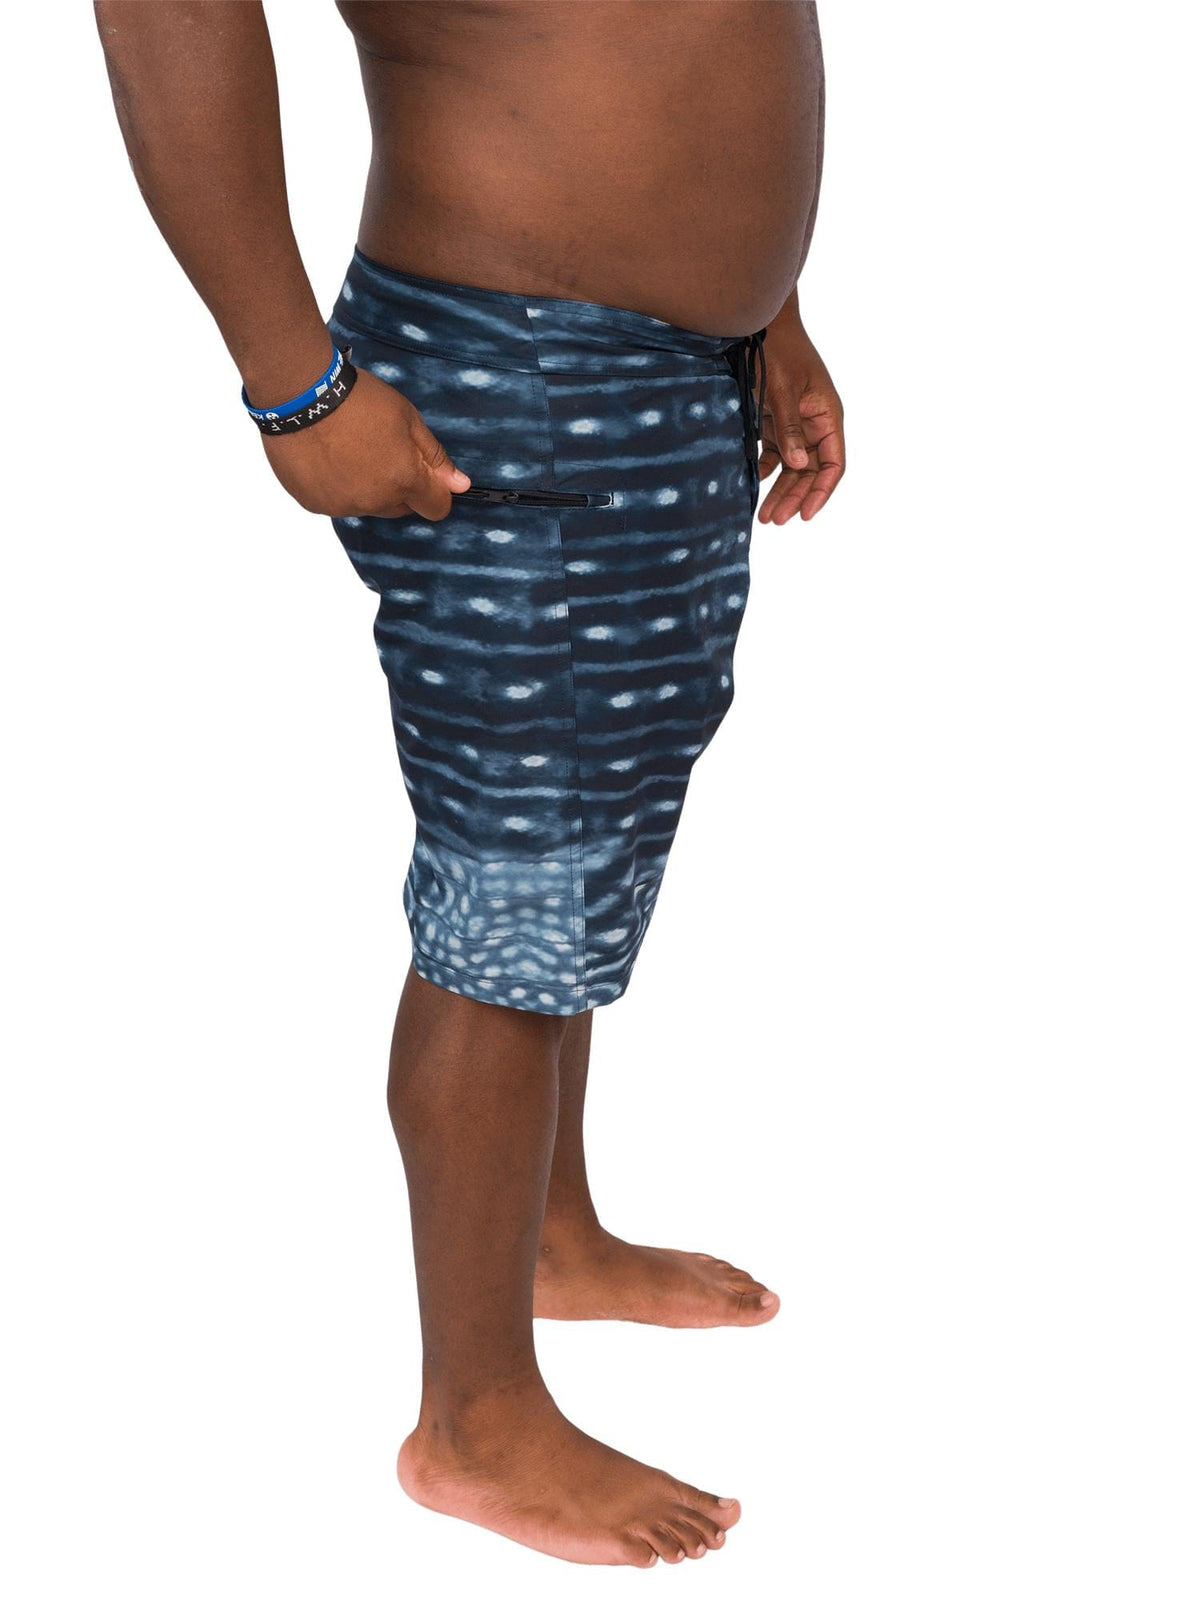 Model: Alex is a fish and wildlife biologist, and science communicator. He is 5’8”, 240 lbs and is wearing size 35 boardshorts.